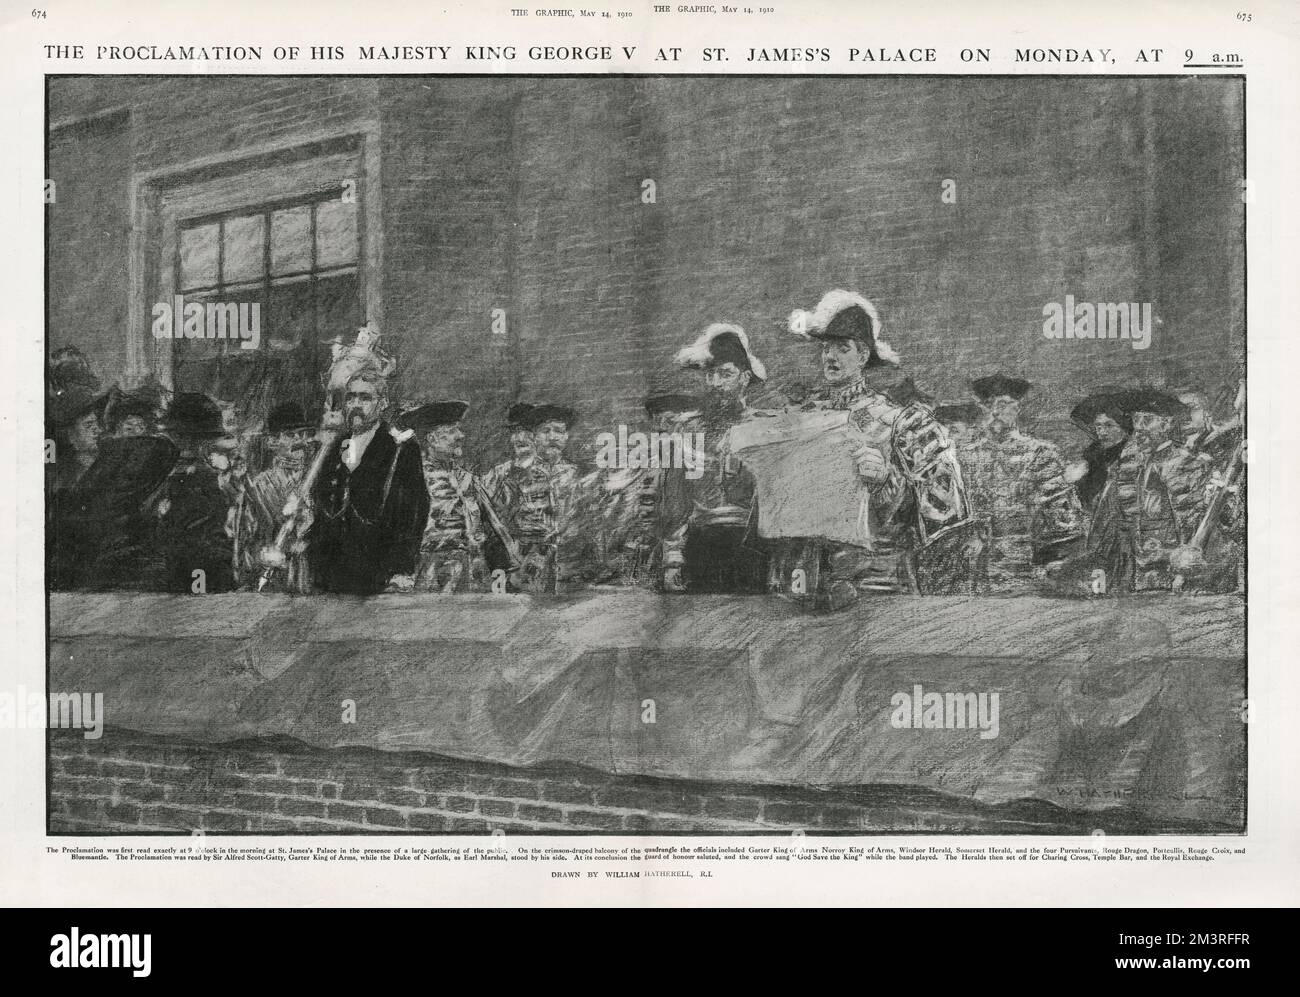 &quot;The High and Mighty Prince George Frederick Ernest Albert is now.... become our only lawful and rightful Liege Lord George V.&quot;: Proclaiming His Majesty from the balcony of St. James's Palace, London.     Date: 1910 Stock Photo